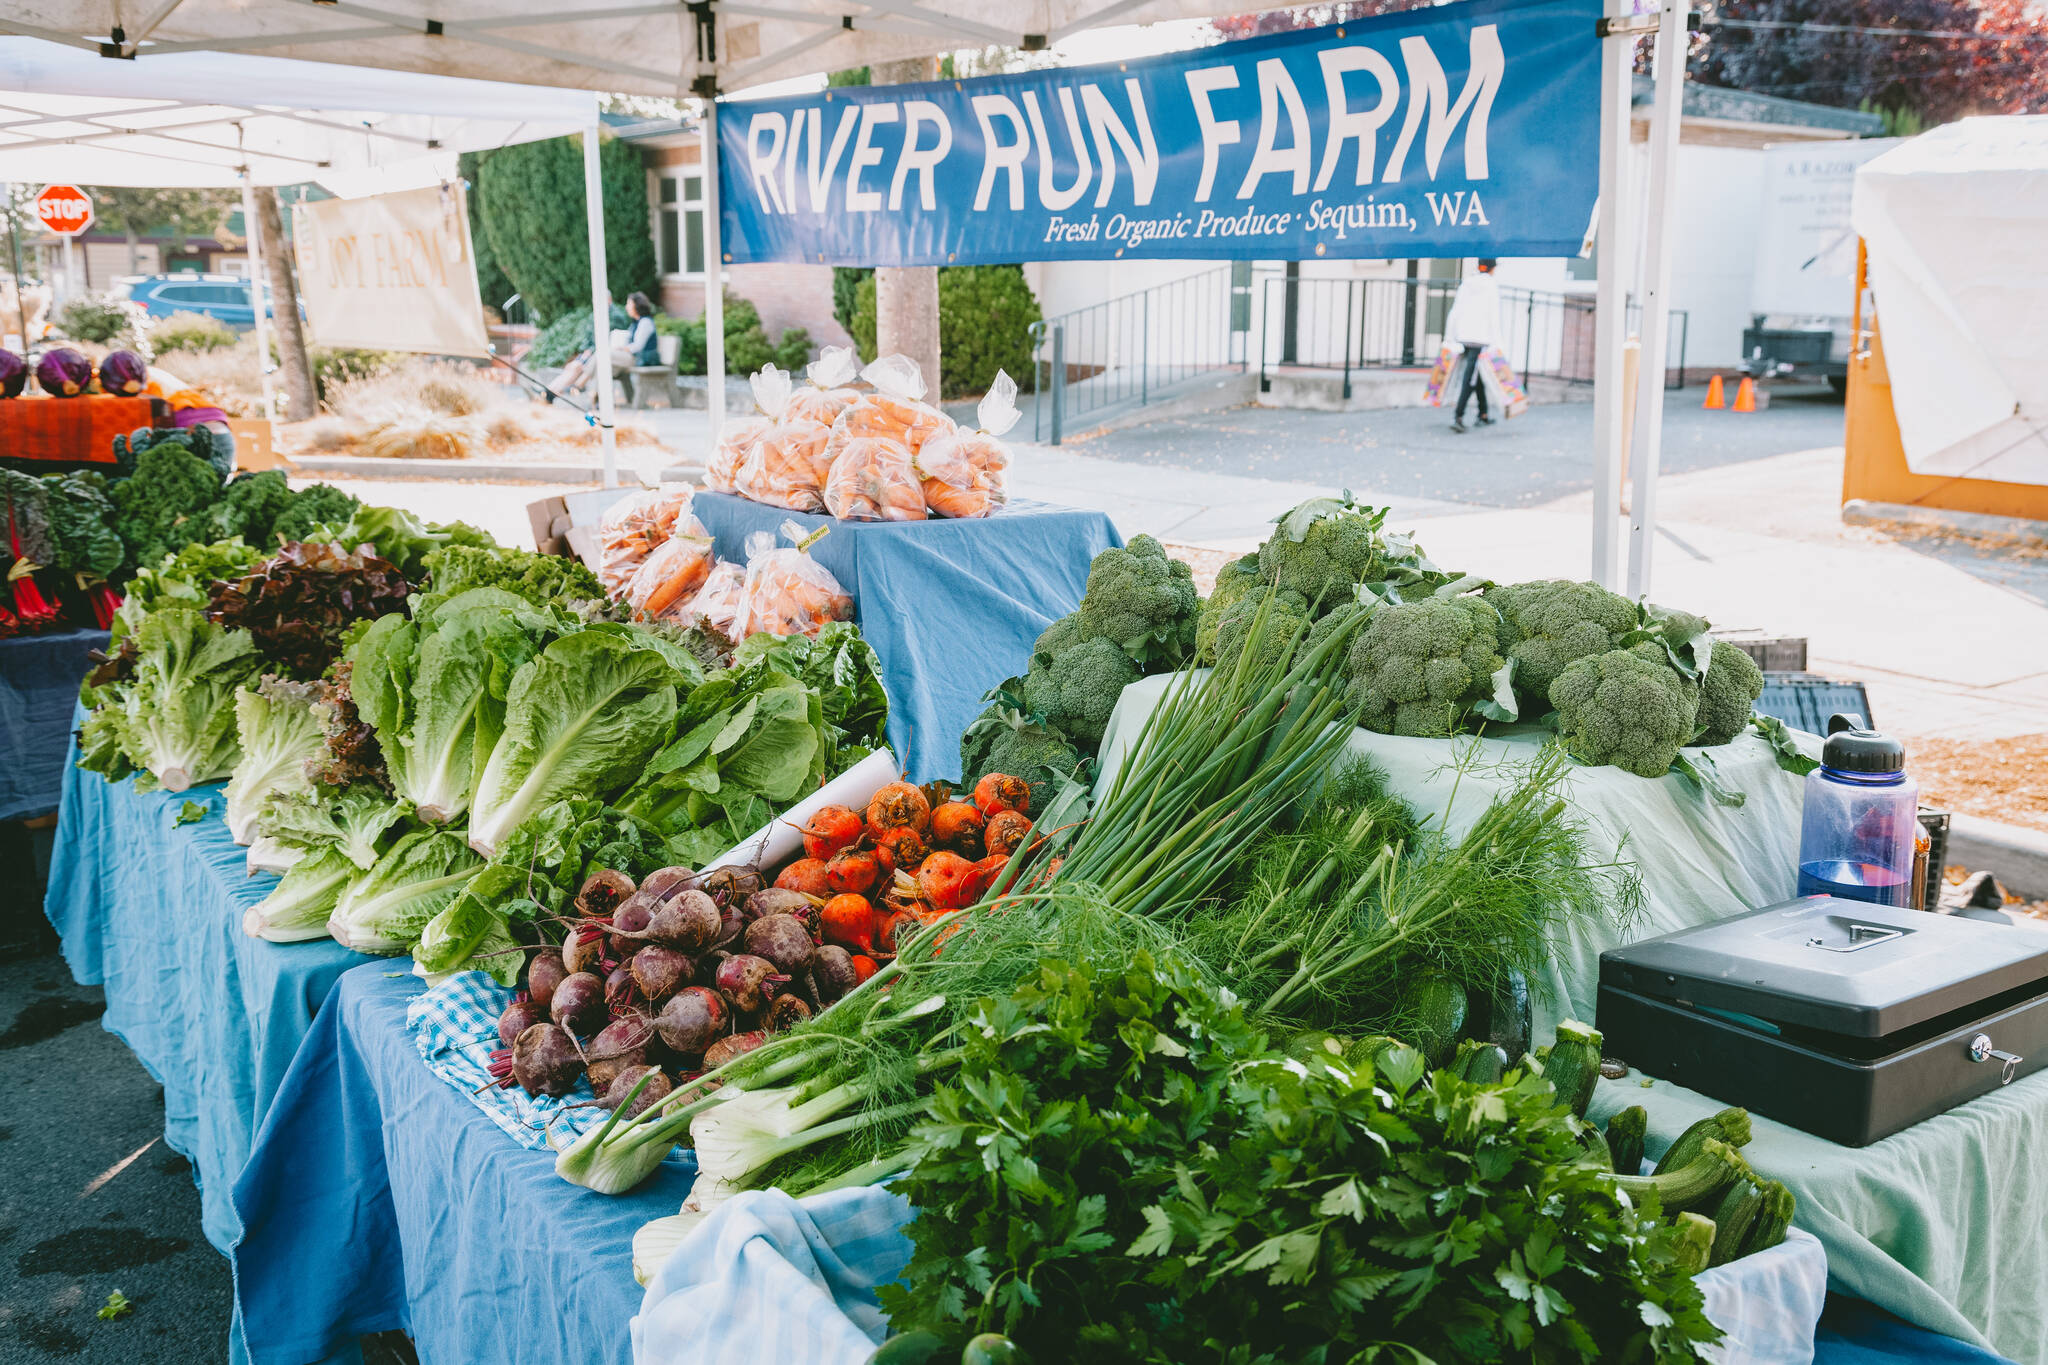 Photo courtesy Sequim Farmers and Artisans Market/ A full harvest is available at River Run Farms’ booth at the Sequim Farmers and Artisans Market.